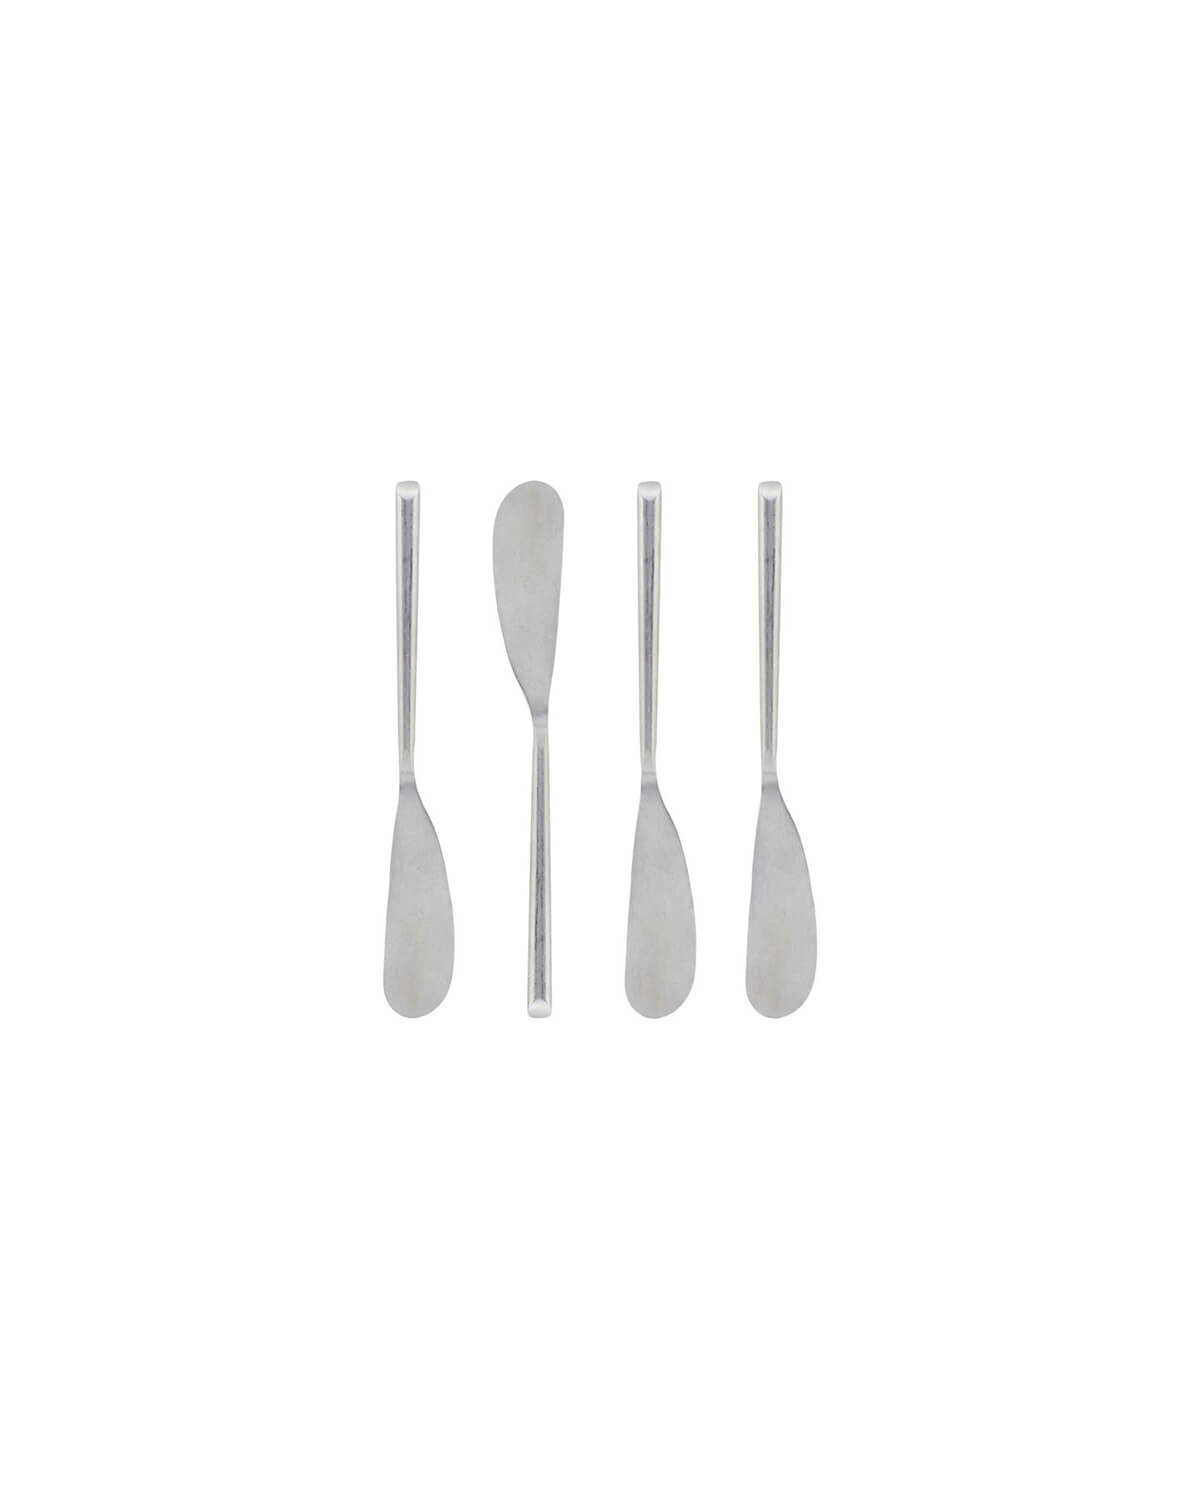 Butter Knife - Daily - Set of 4 | Stainless Steel | by Nicolas Vahé - Lifestory